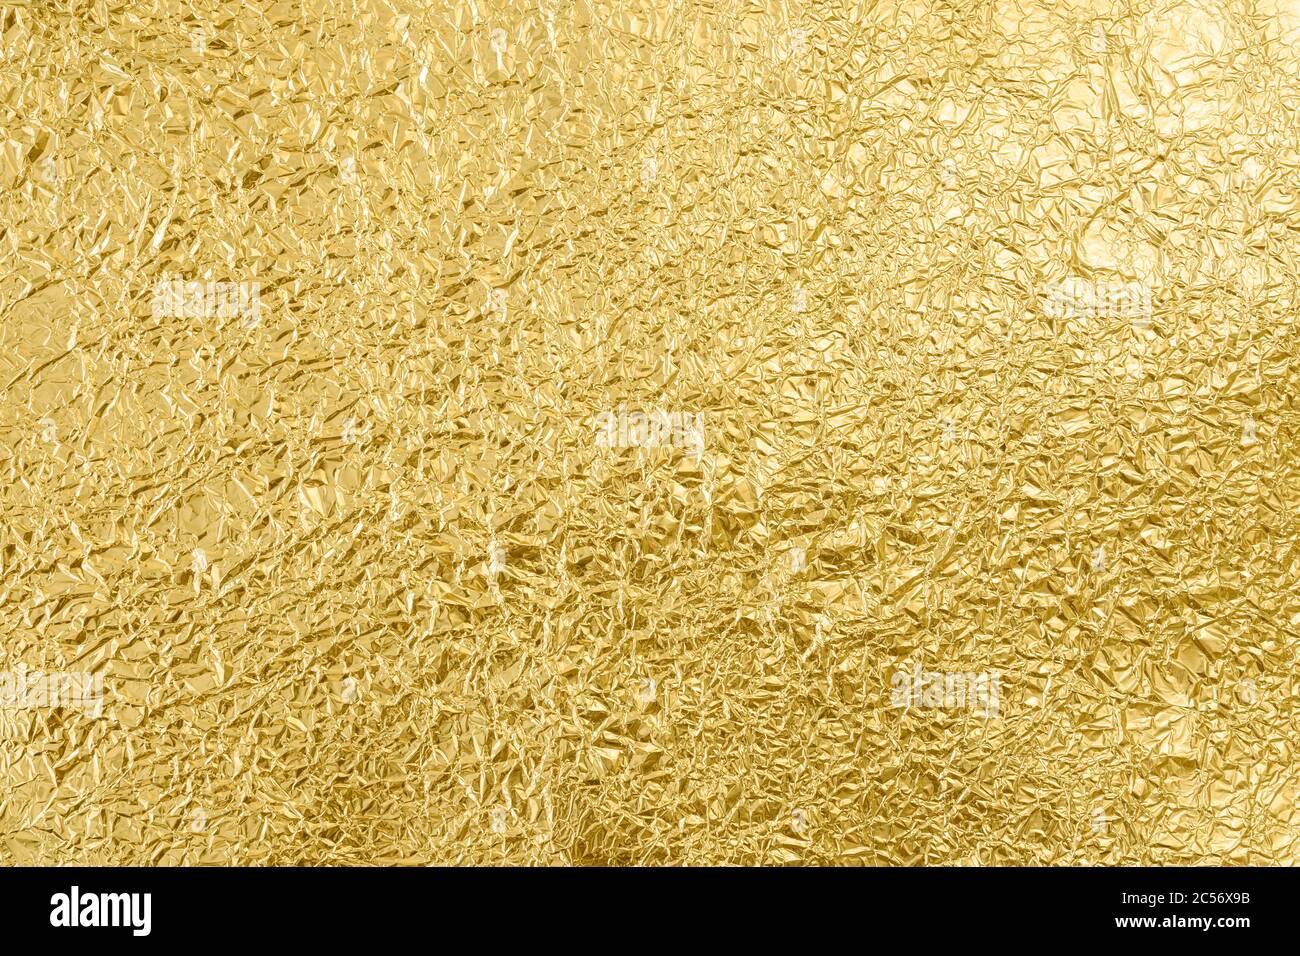 Crumpled golden tin foil surface, top view. Abstract full frame textured silvery background. Stock Photo